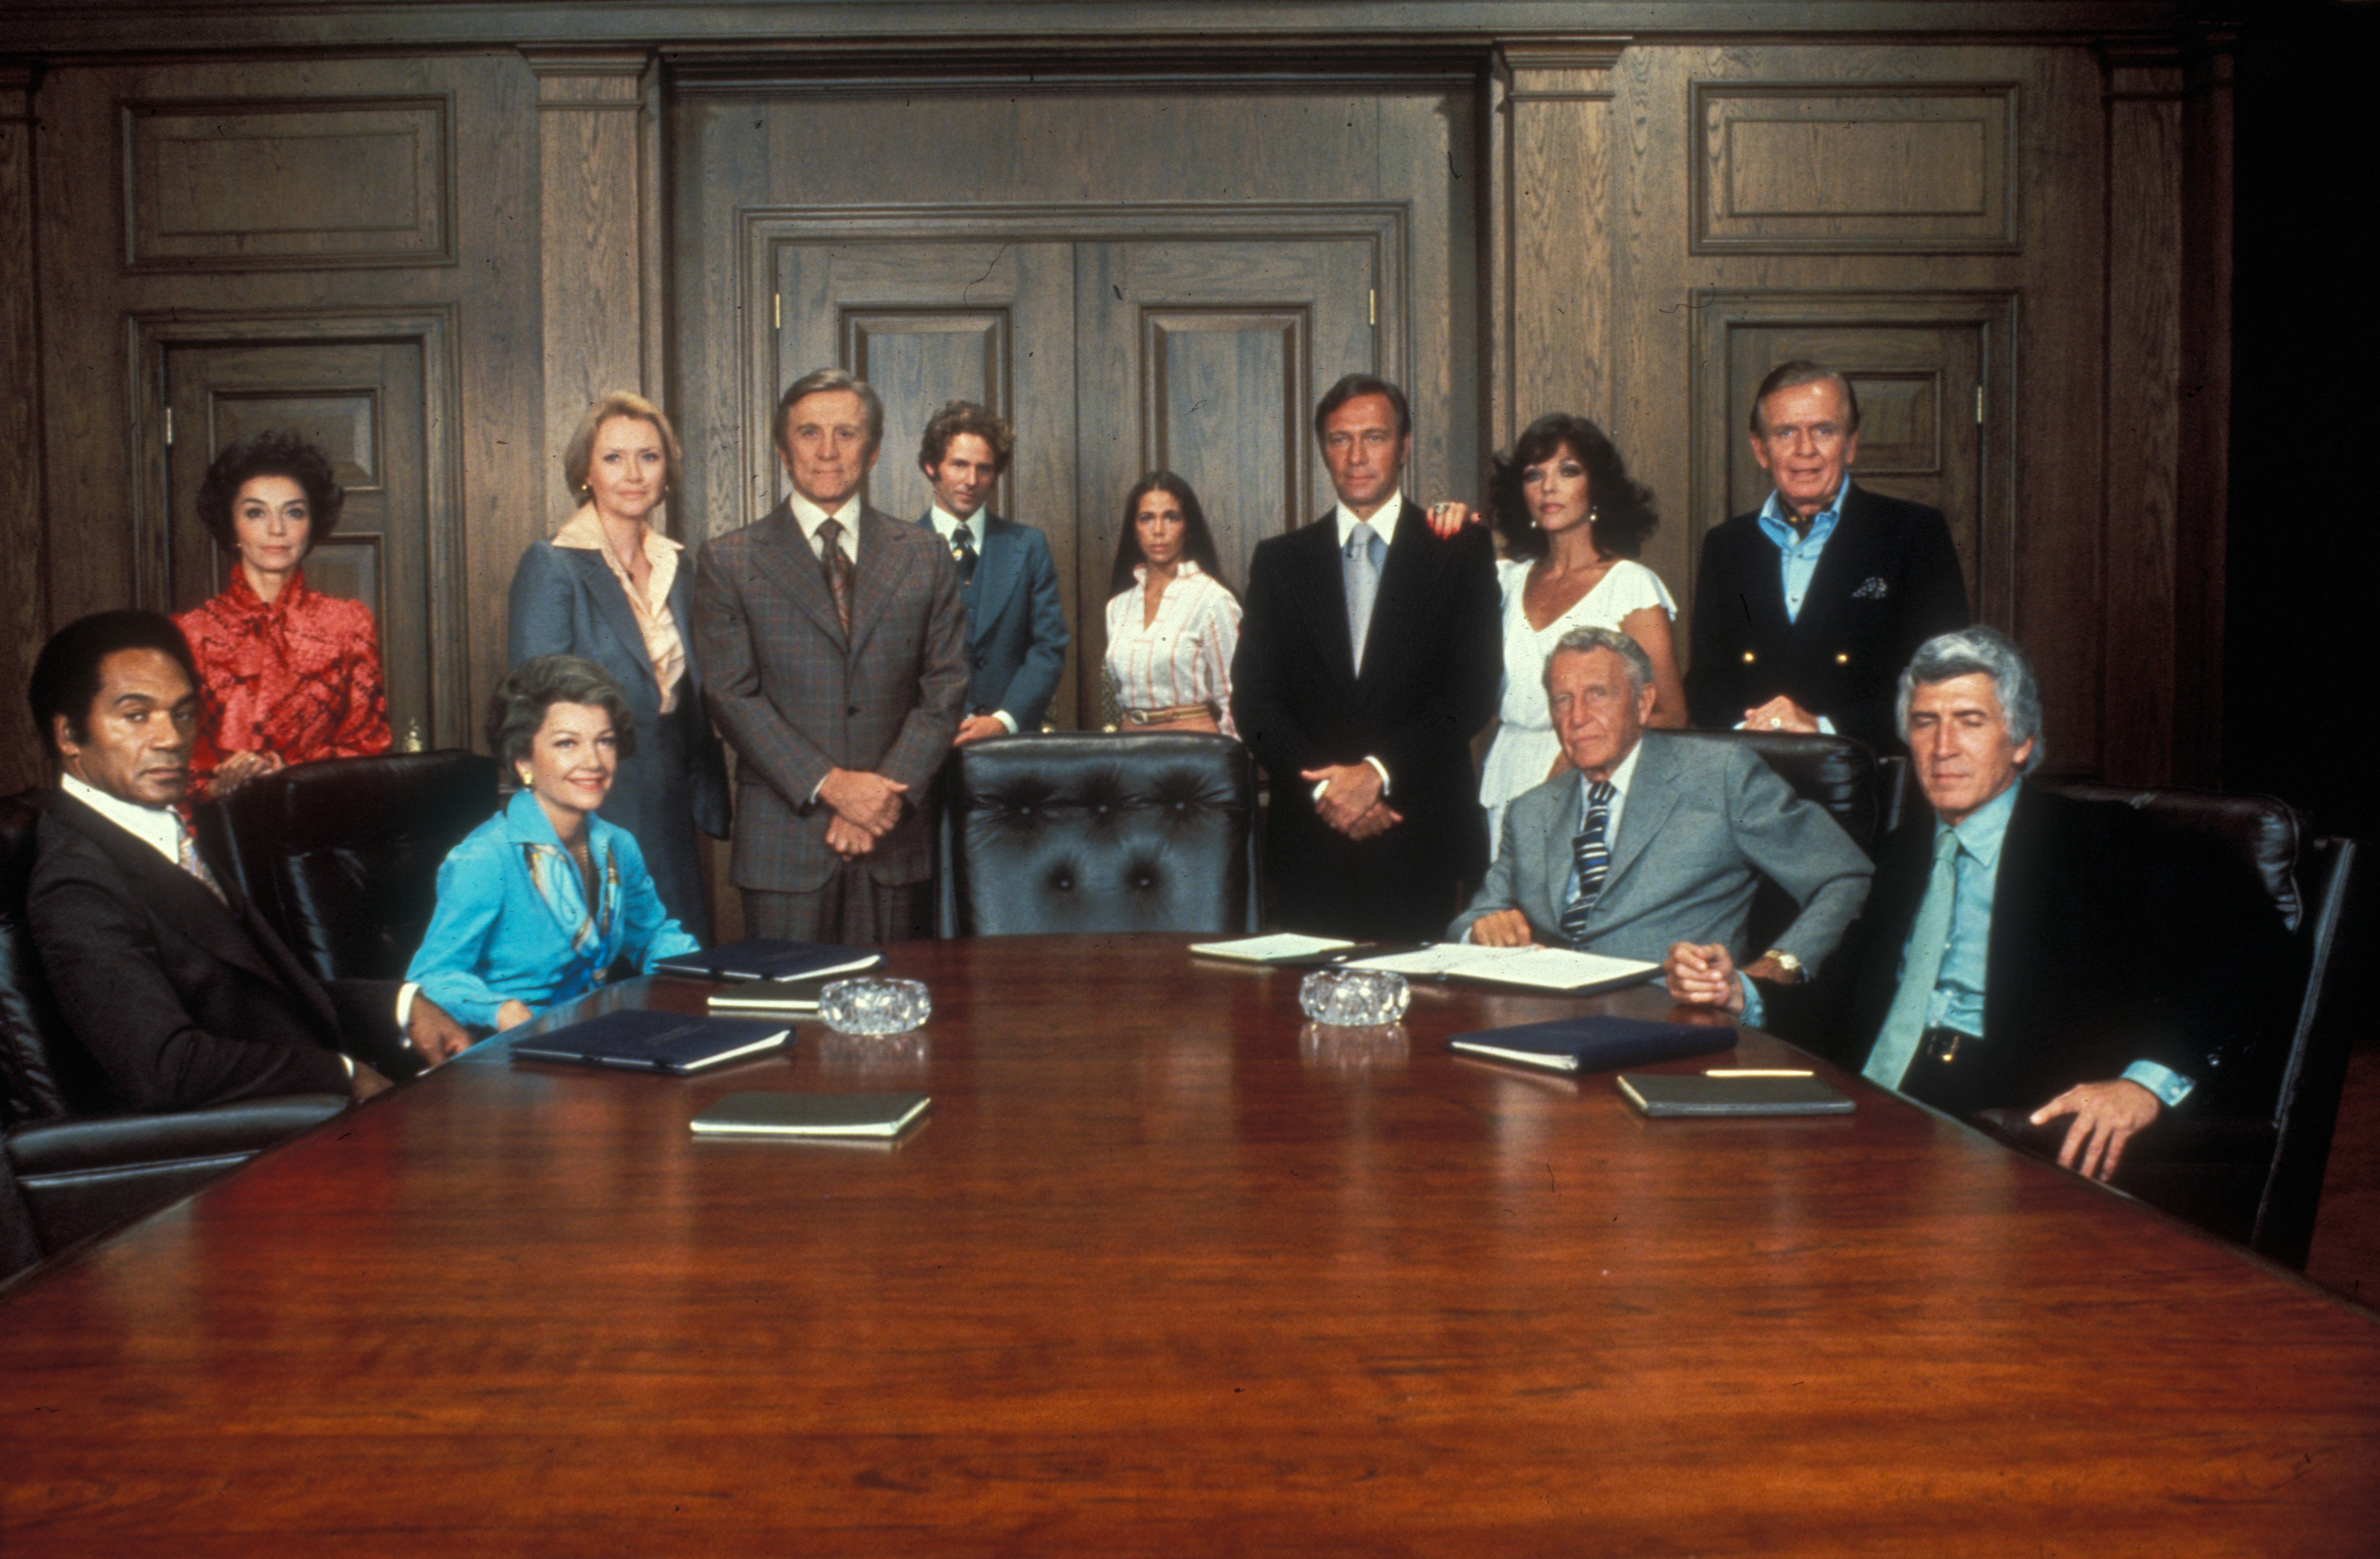 Still of Kirk Douglas, Anne Baxter, Ralph Bellamy, Timothy Bottoms, Joan Collins, Christopher Plummer, Susan Flannery, Amy Levitt, Patrick O'Neal, Percy Rodrigues and Hayden Rorke in Arthur Hailey's the Moneychangers (1976)